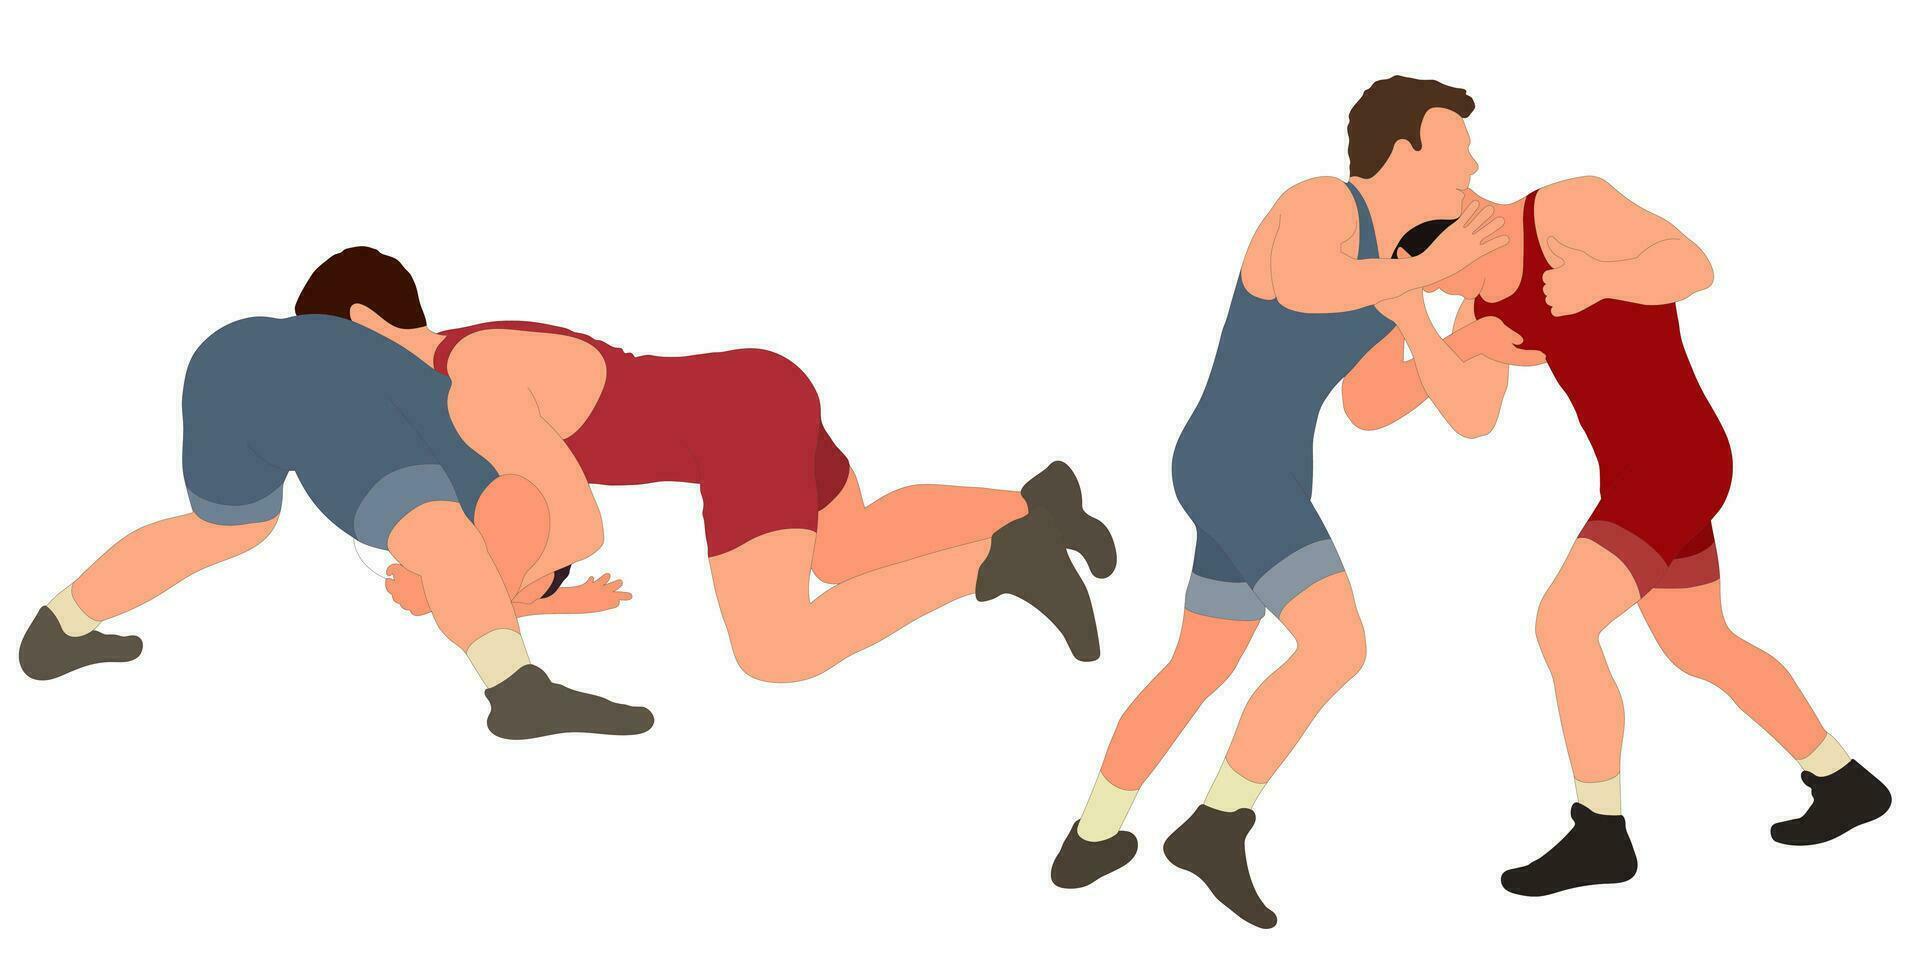 Image of athletes wrestlers in wrestling, fighting. Greco Roman wrestling, fight, combating, struggle, grappling, duel, mixed martial art, sportsmanship vector